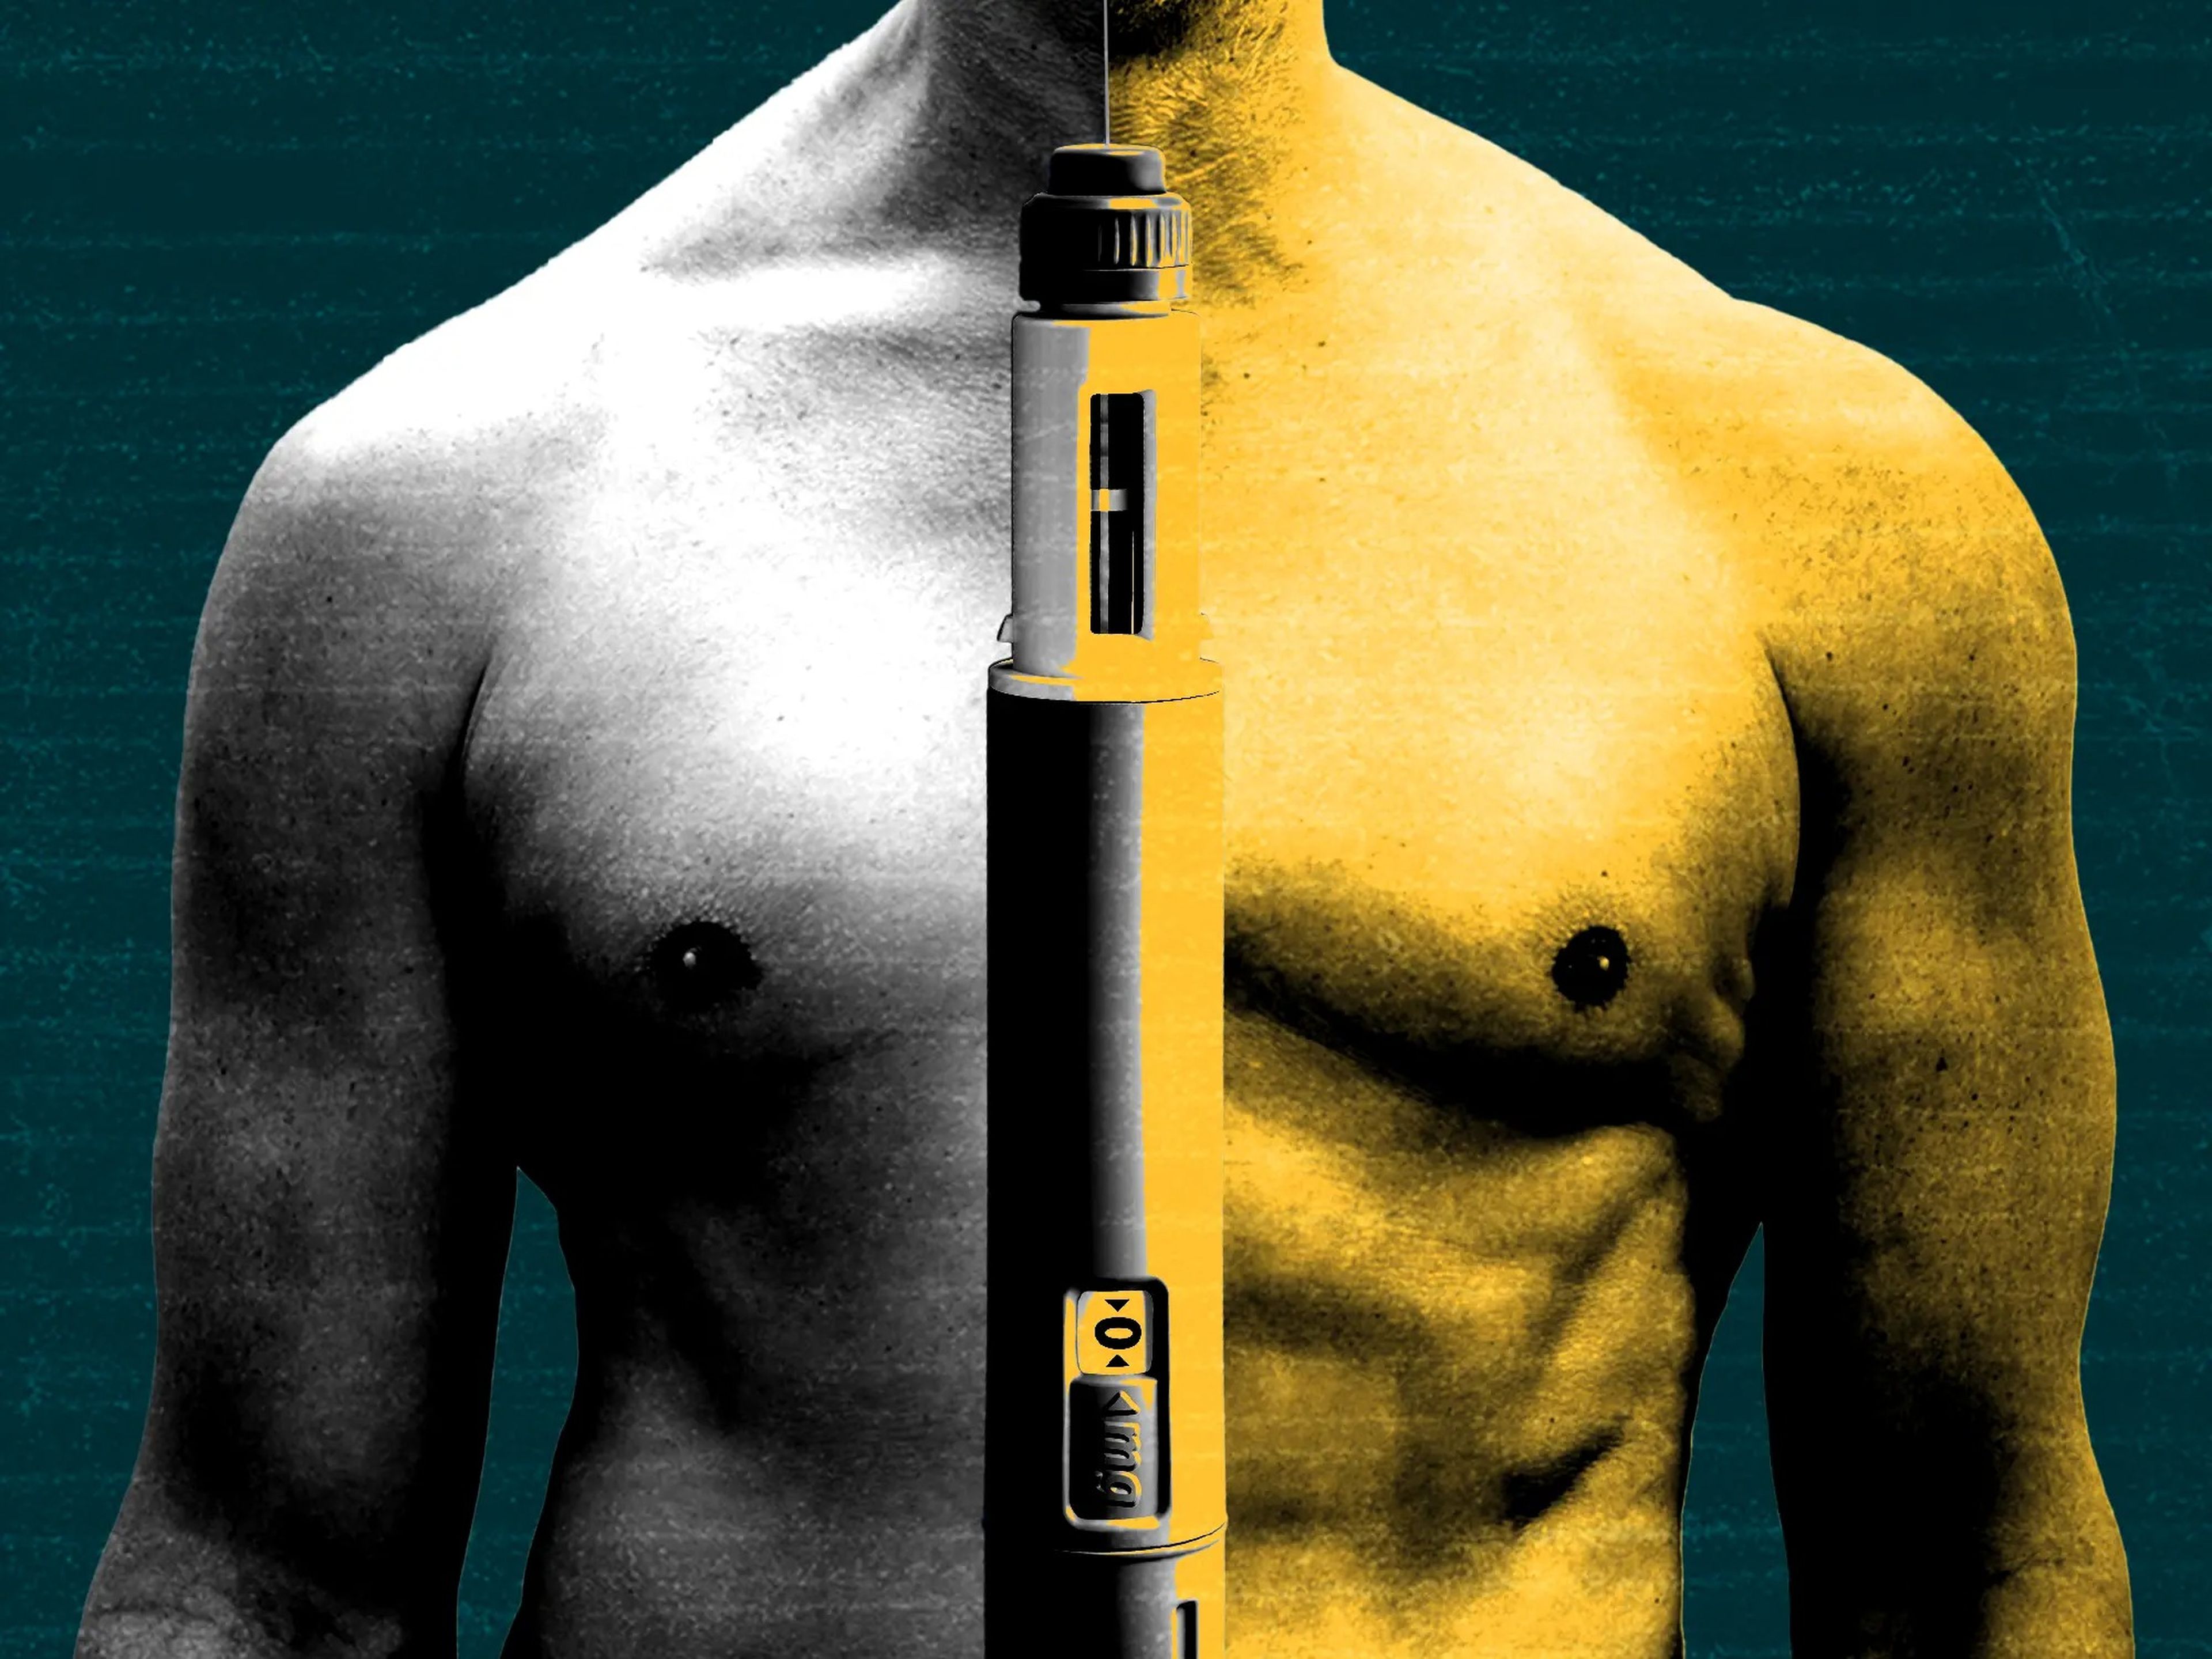 A flabby torso next to a muscular torso divided by an injection pen